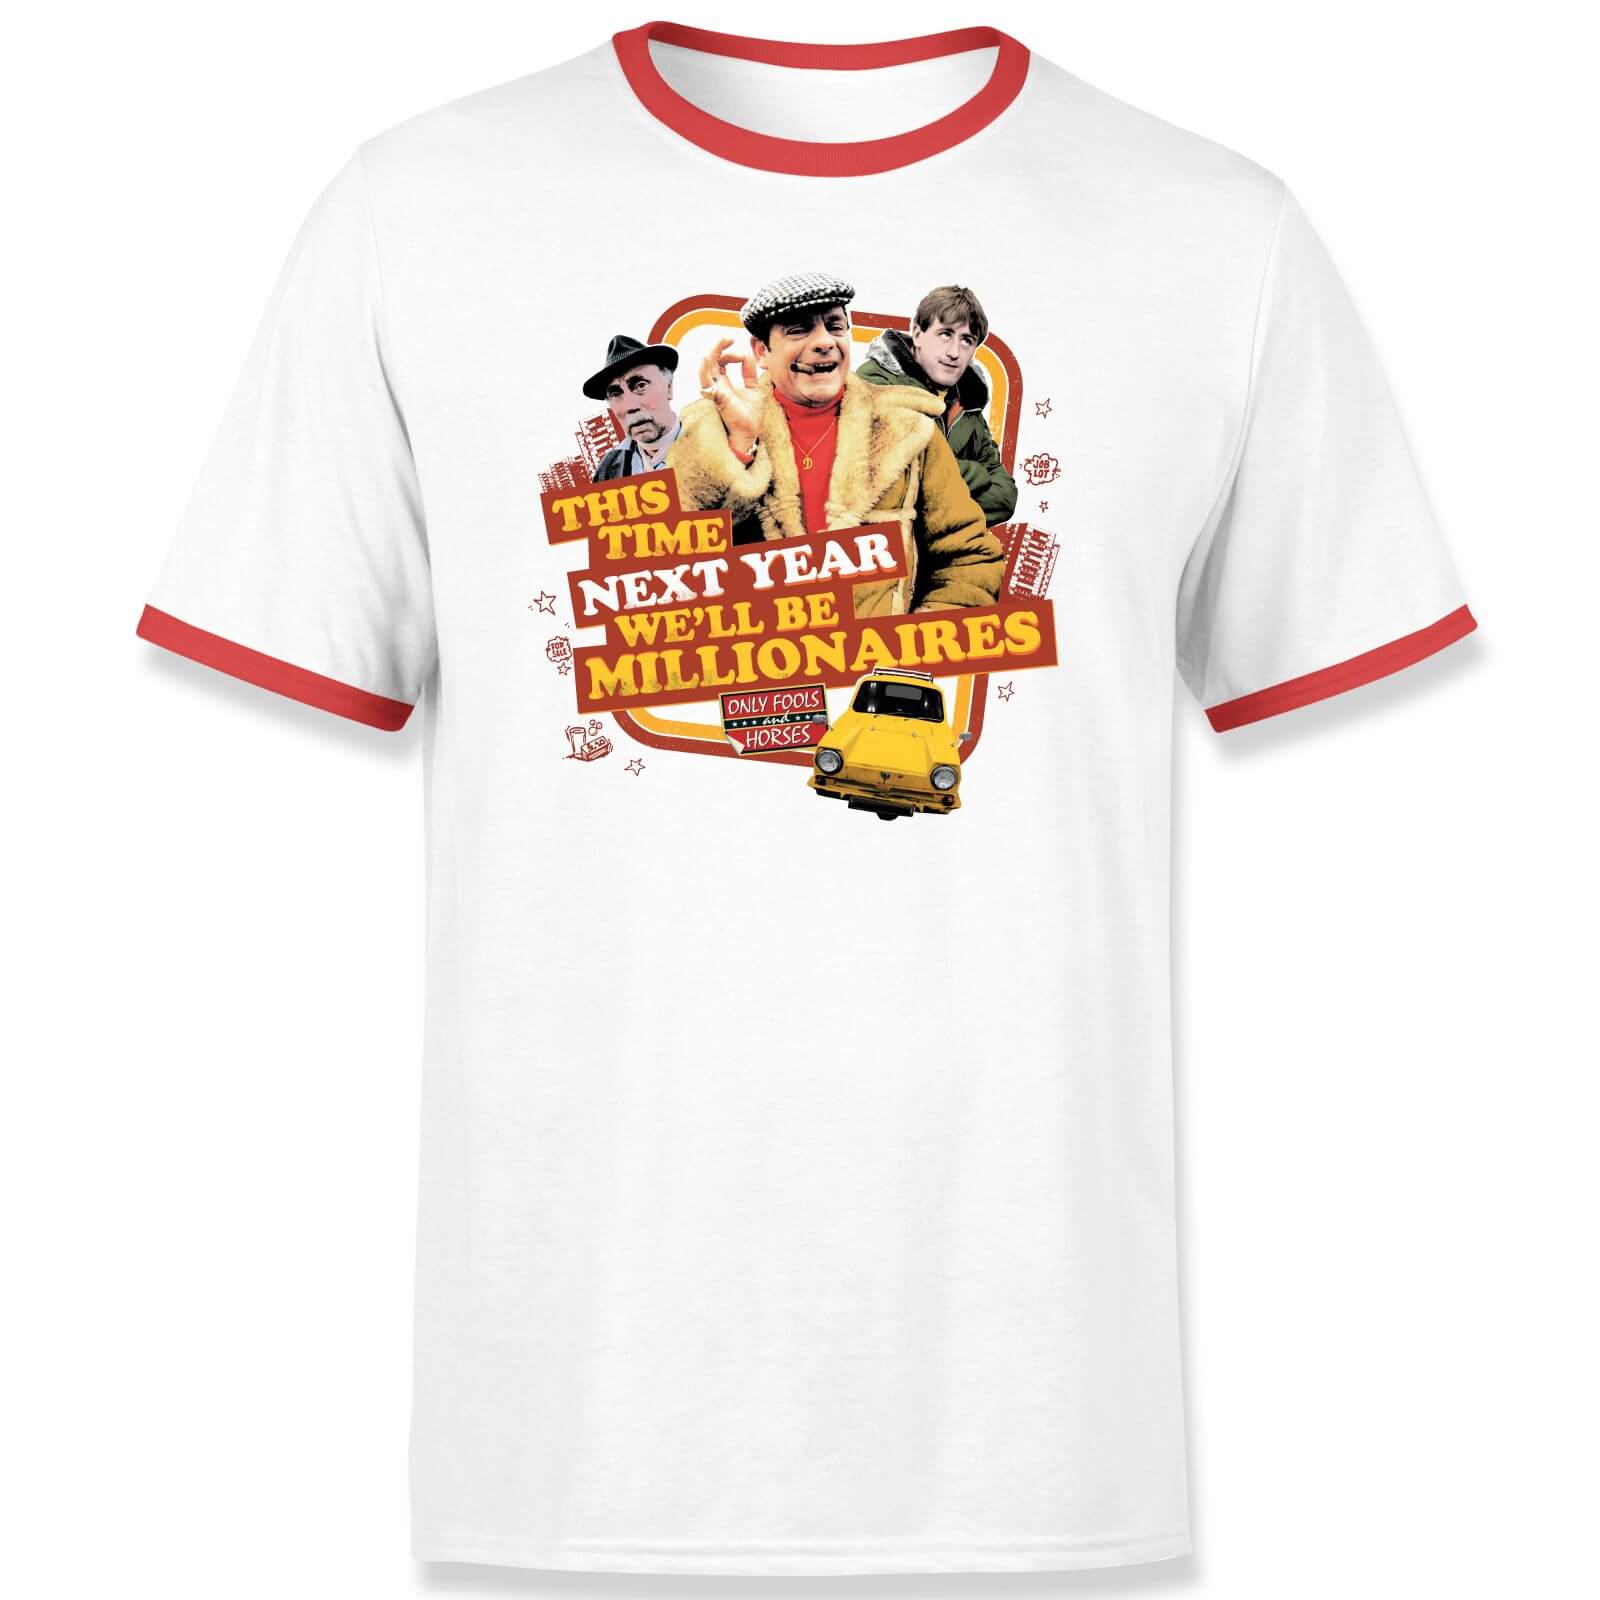 Only Fools And Horses This Time Next Year We'll Be Millionaires Unisex Ringer T-Shirt - White/Red - XS